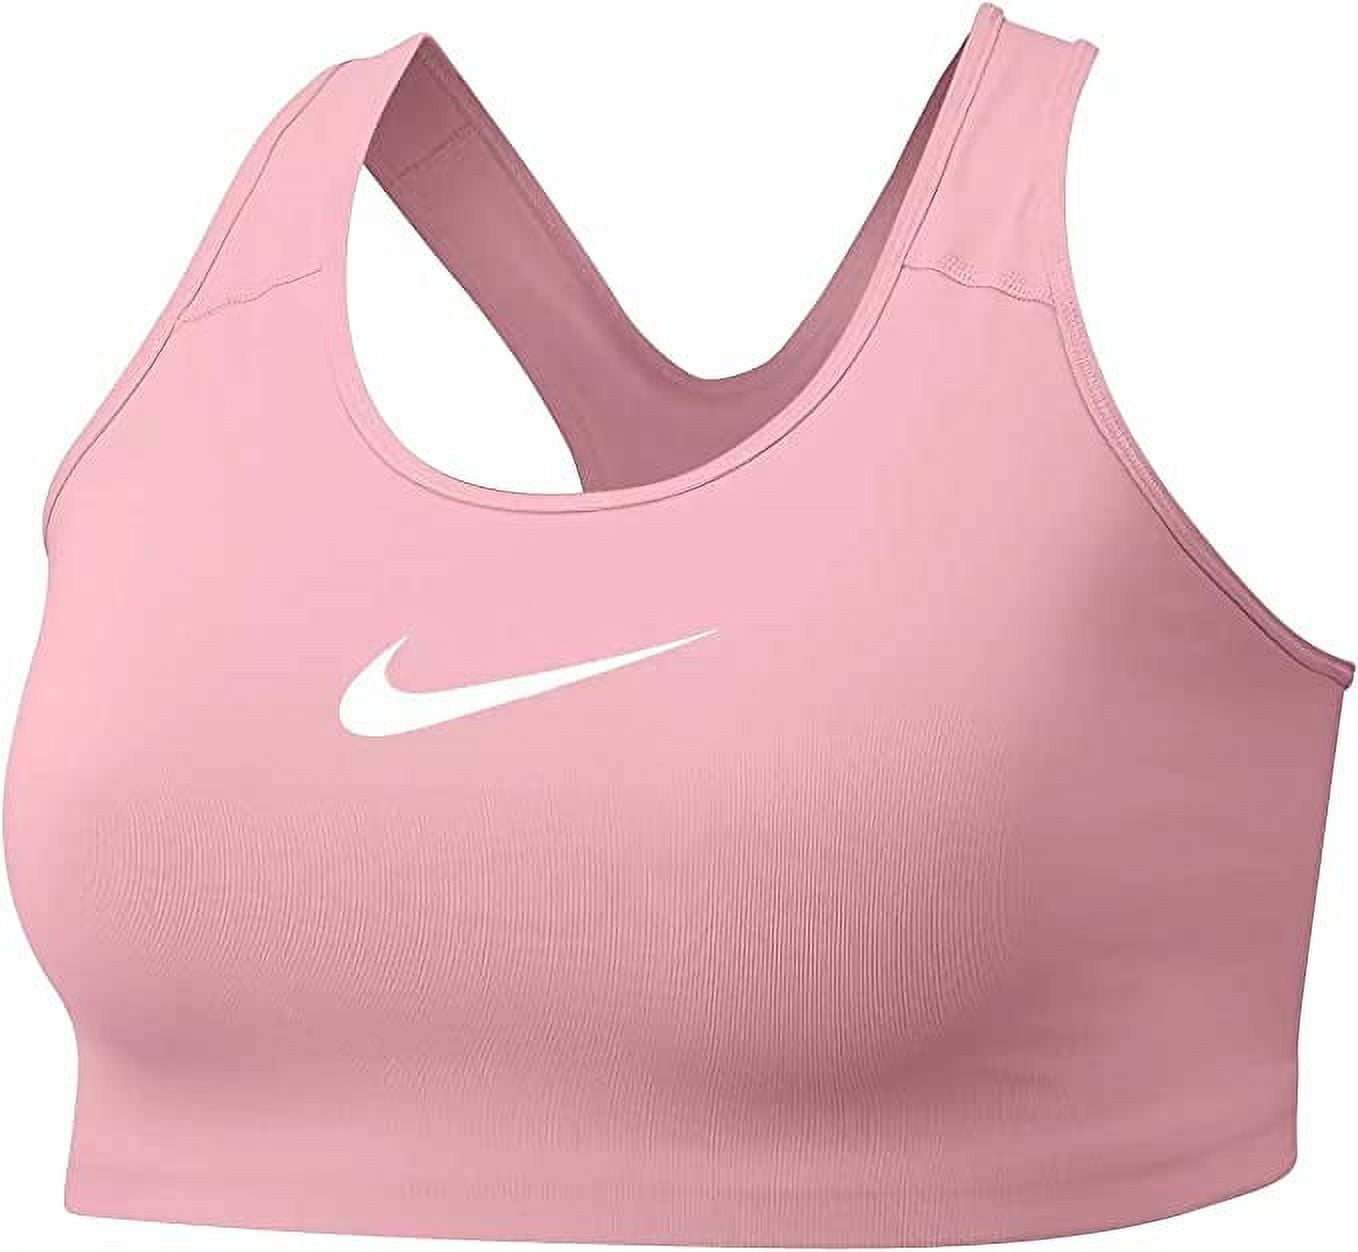 NWT Women's MEDIUM Nike Impact Strappy Sports Bra Pink High Support MSRP:  $55.00